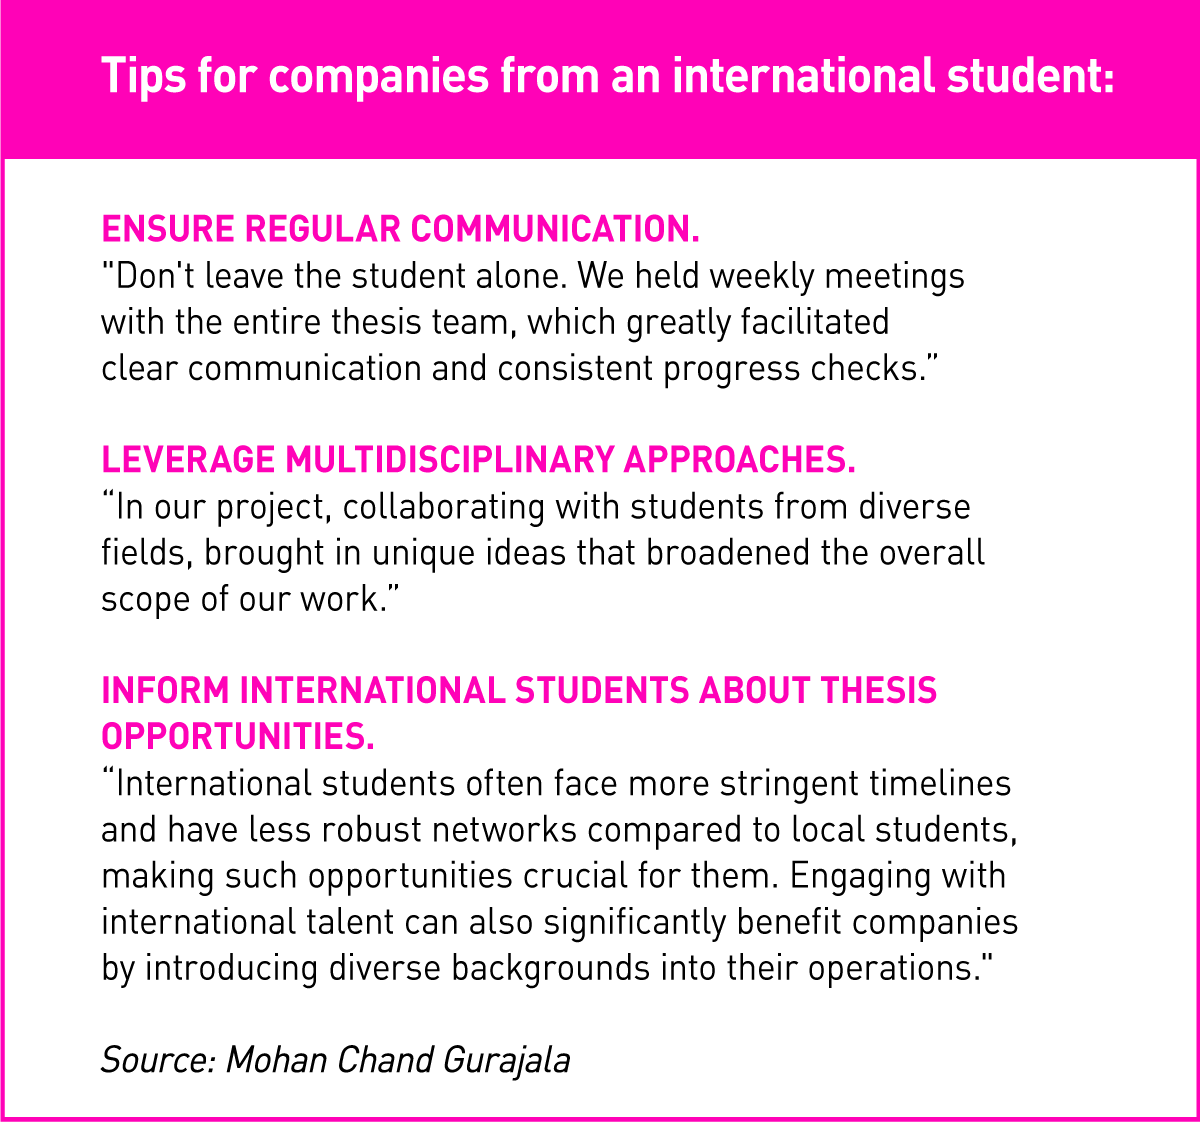 Tips from an international student for companies.